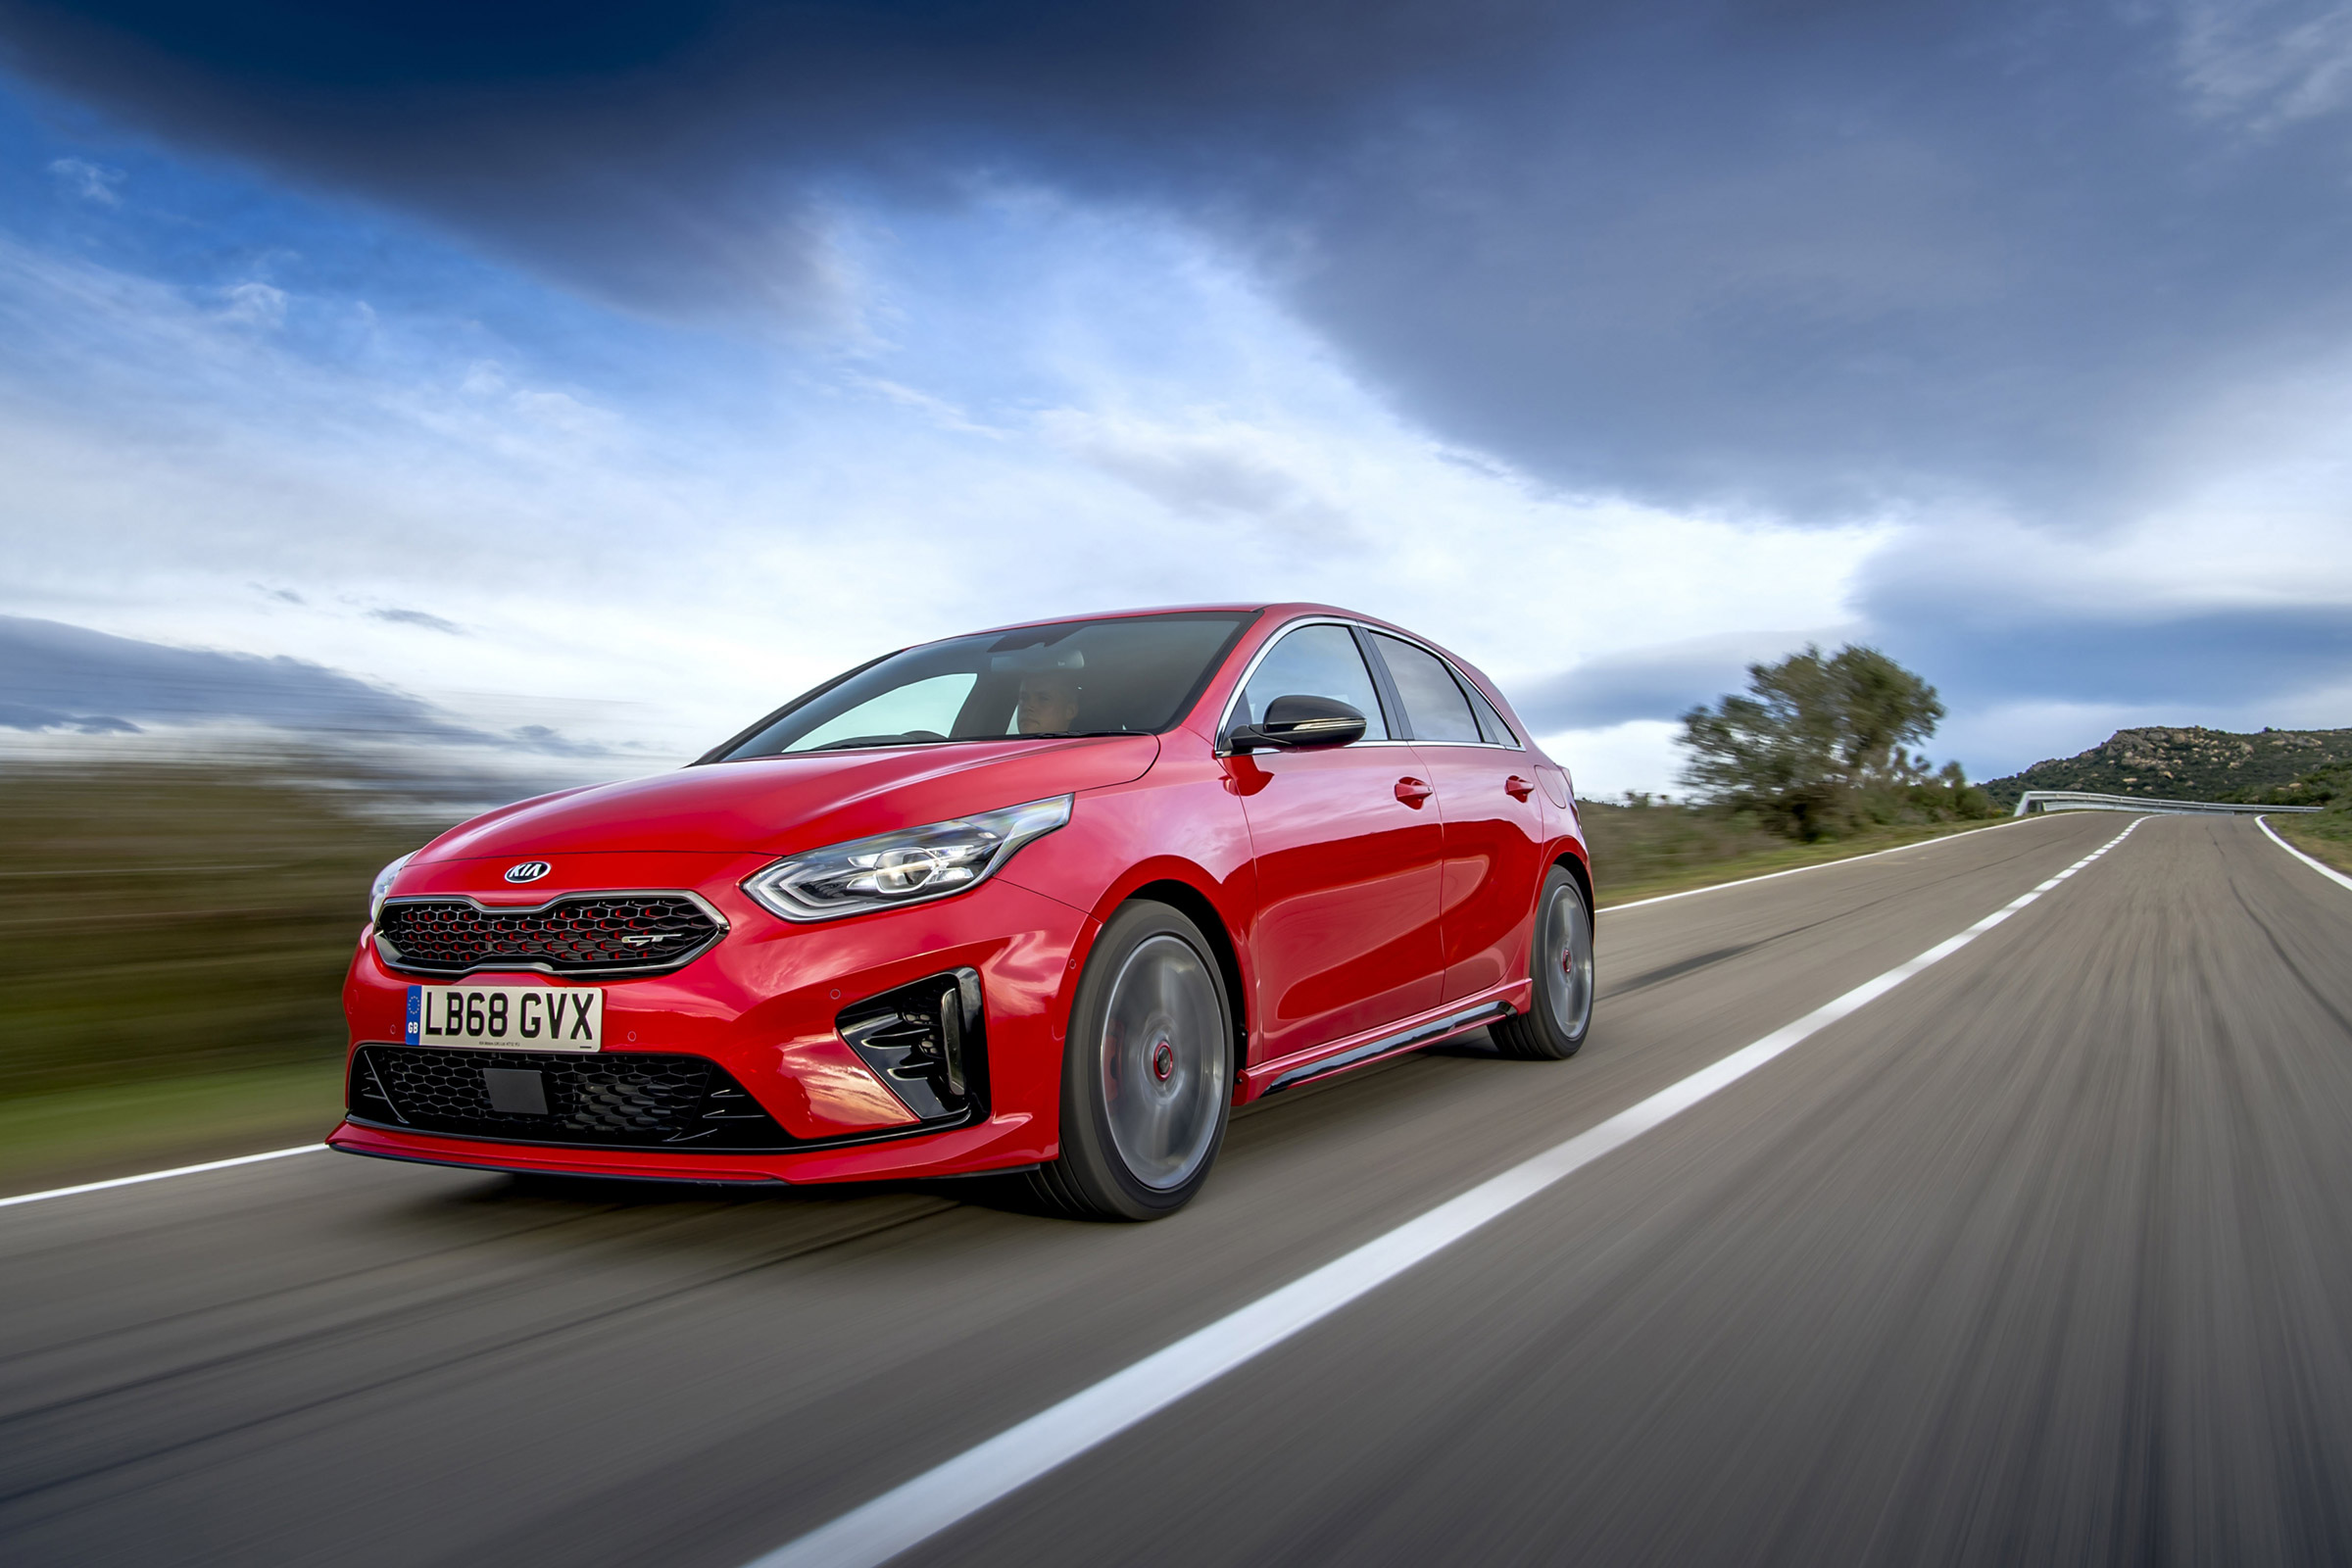 2019 Kia Ceed GT review – more bark than bite from this warm hatchback